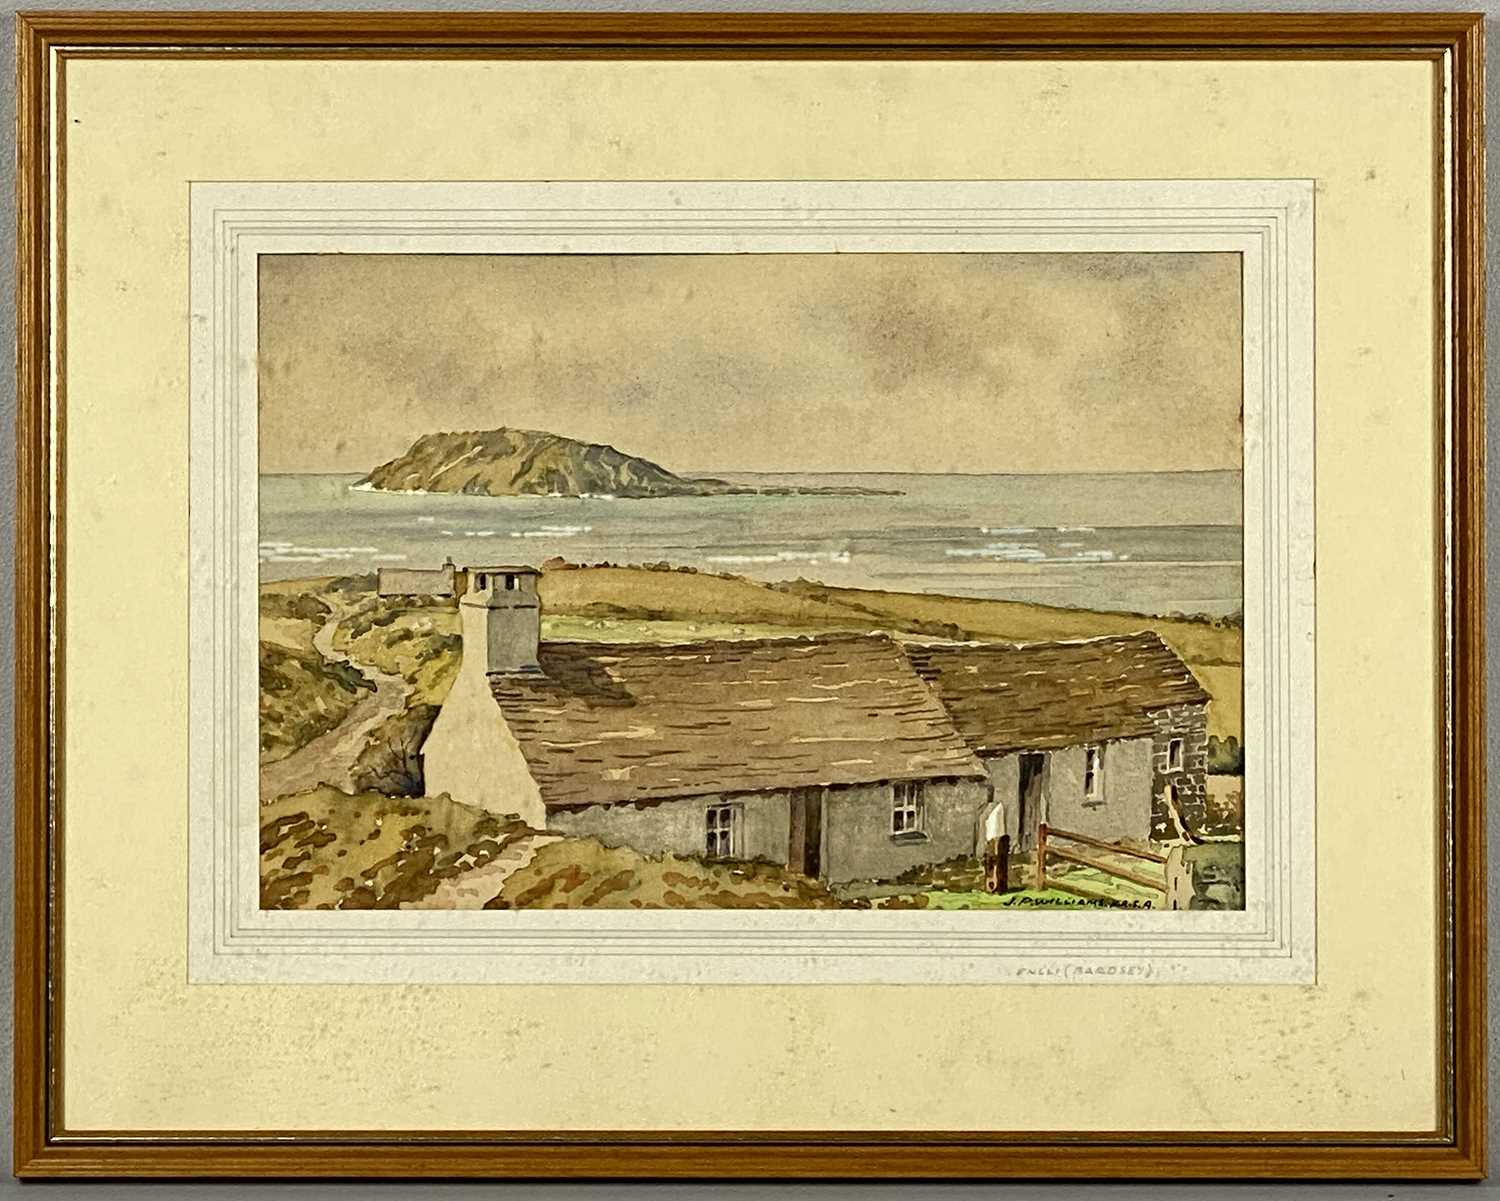 ‡ J. P. WILLIAMS F.R.S.A 20th century watercolour - entitled "Enlli" (Bardsey), signed lower right - Image 4 of 4